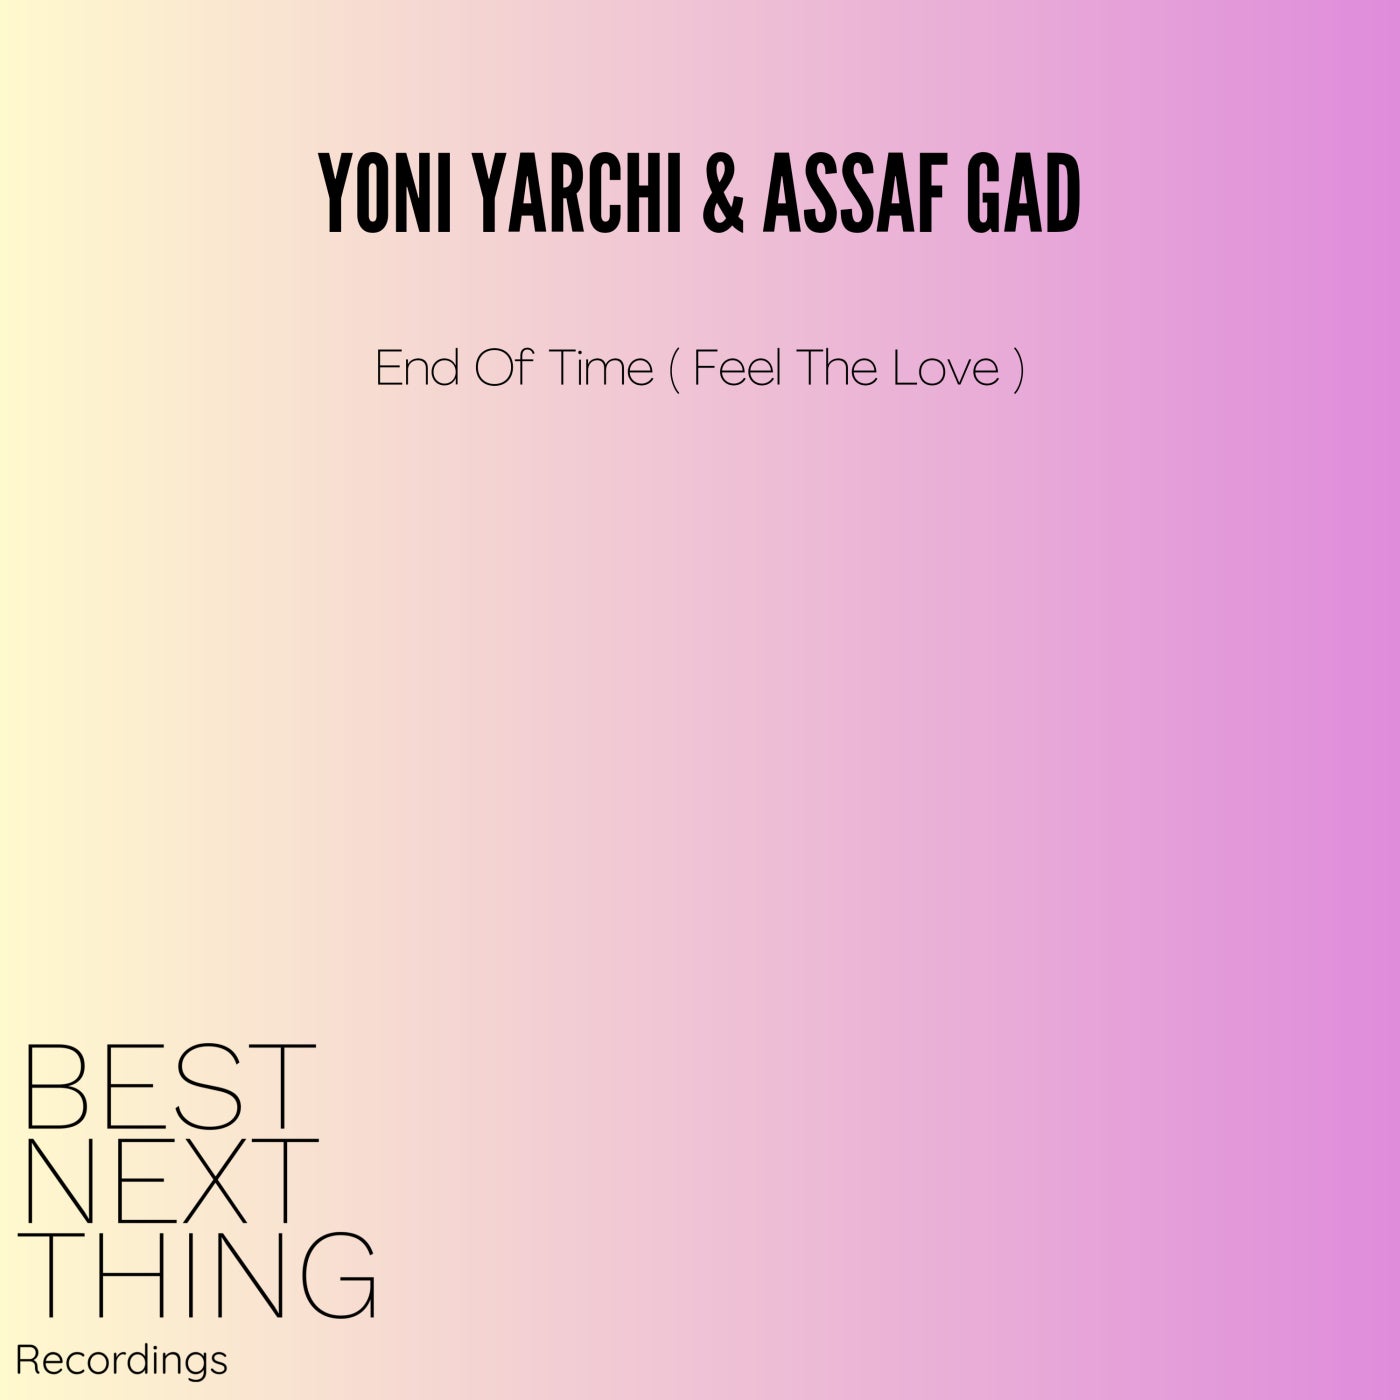 Yoni Yarchi, Assaf Gad – End Of Time (Feel The Love) [BNT01]